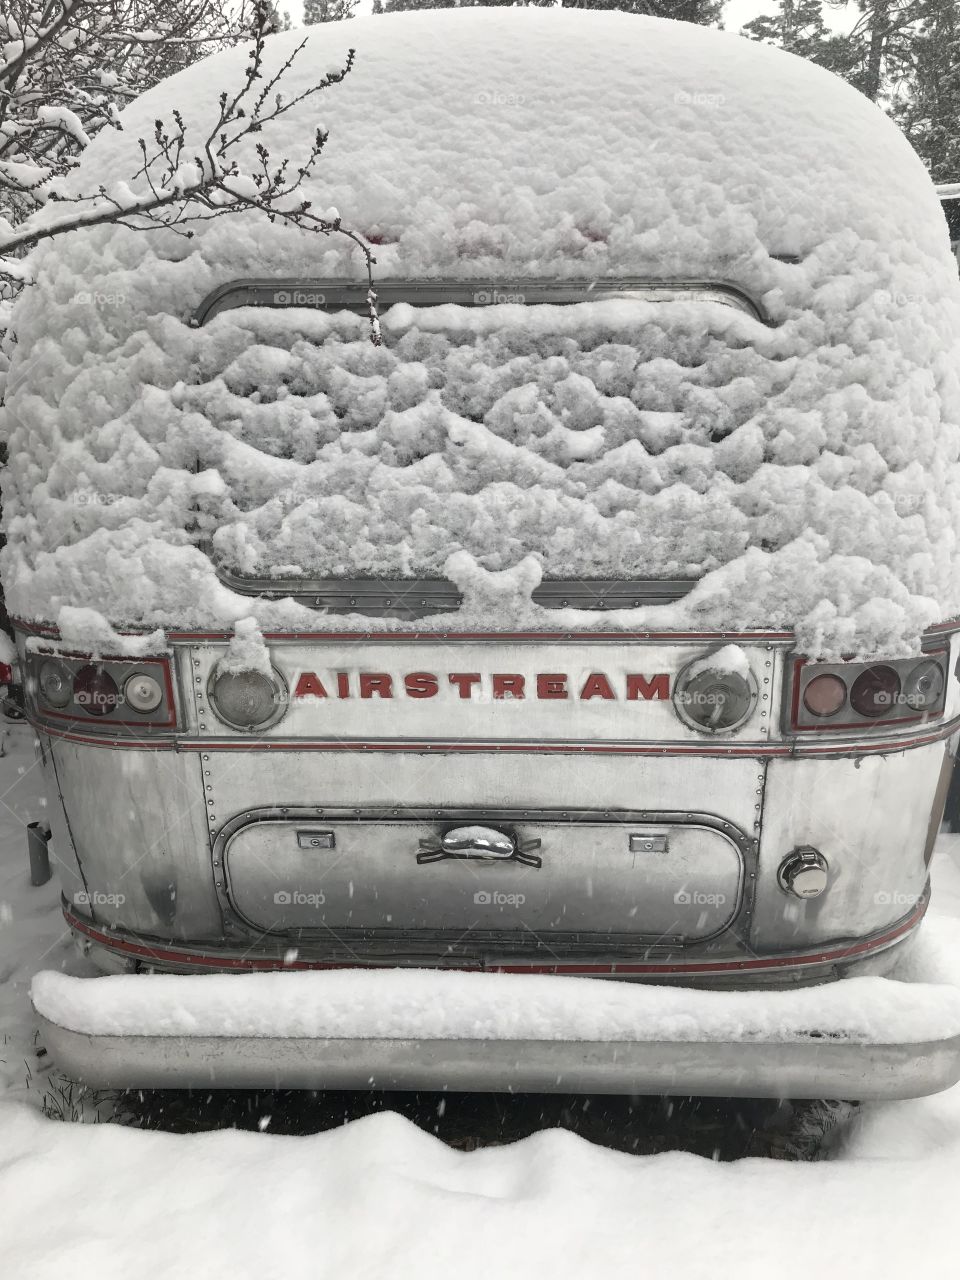 A snow covered airstream bus parked in the lot of a local brewery. The metal of the vehicle blends in with the fallen snow. 